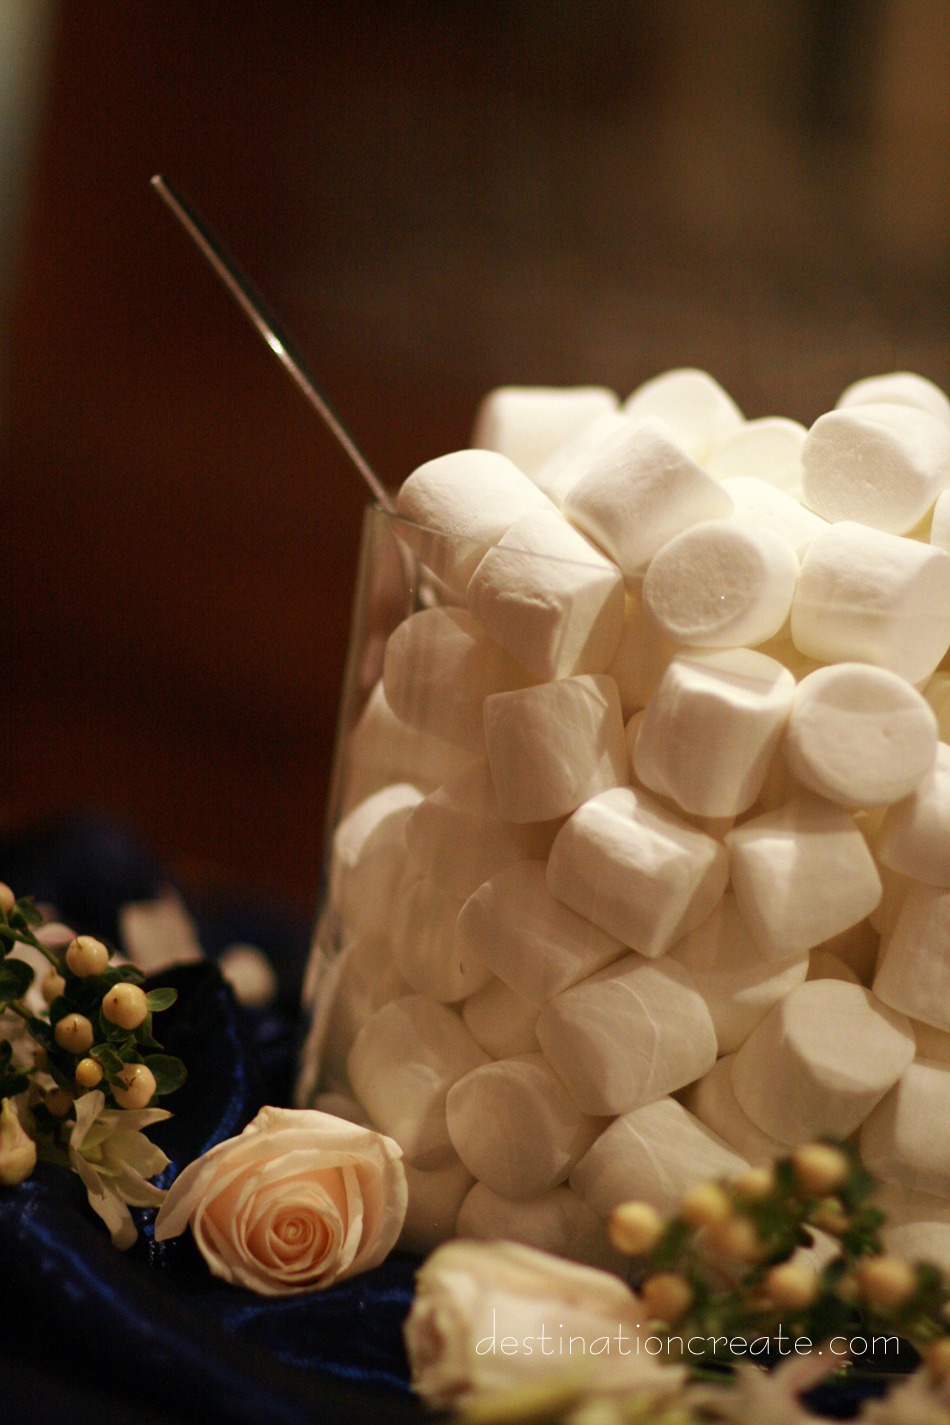 Hot chocolate bar ideas: Destination Create offers wedding planning, decorating, styling, planning & specialty rentals.